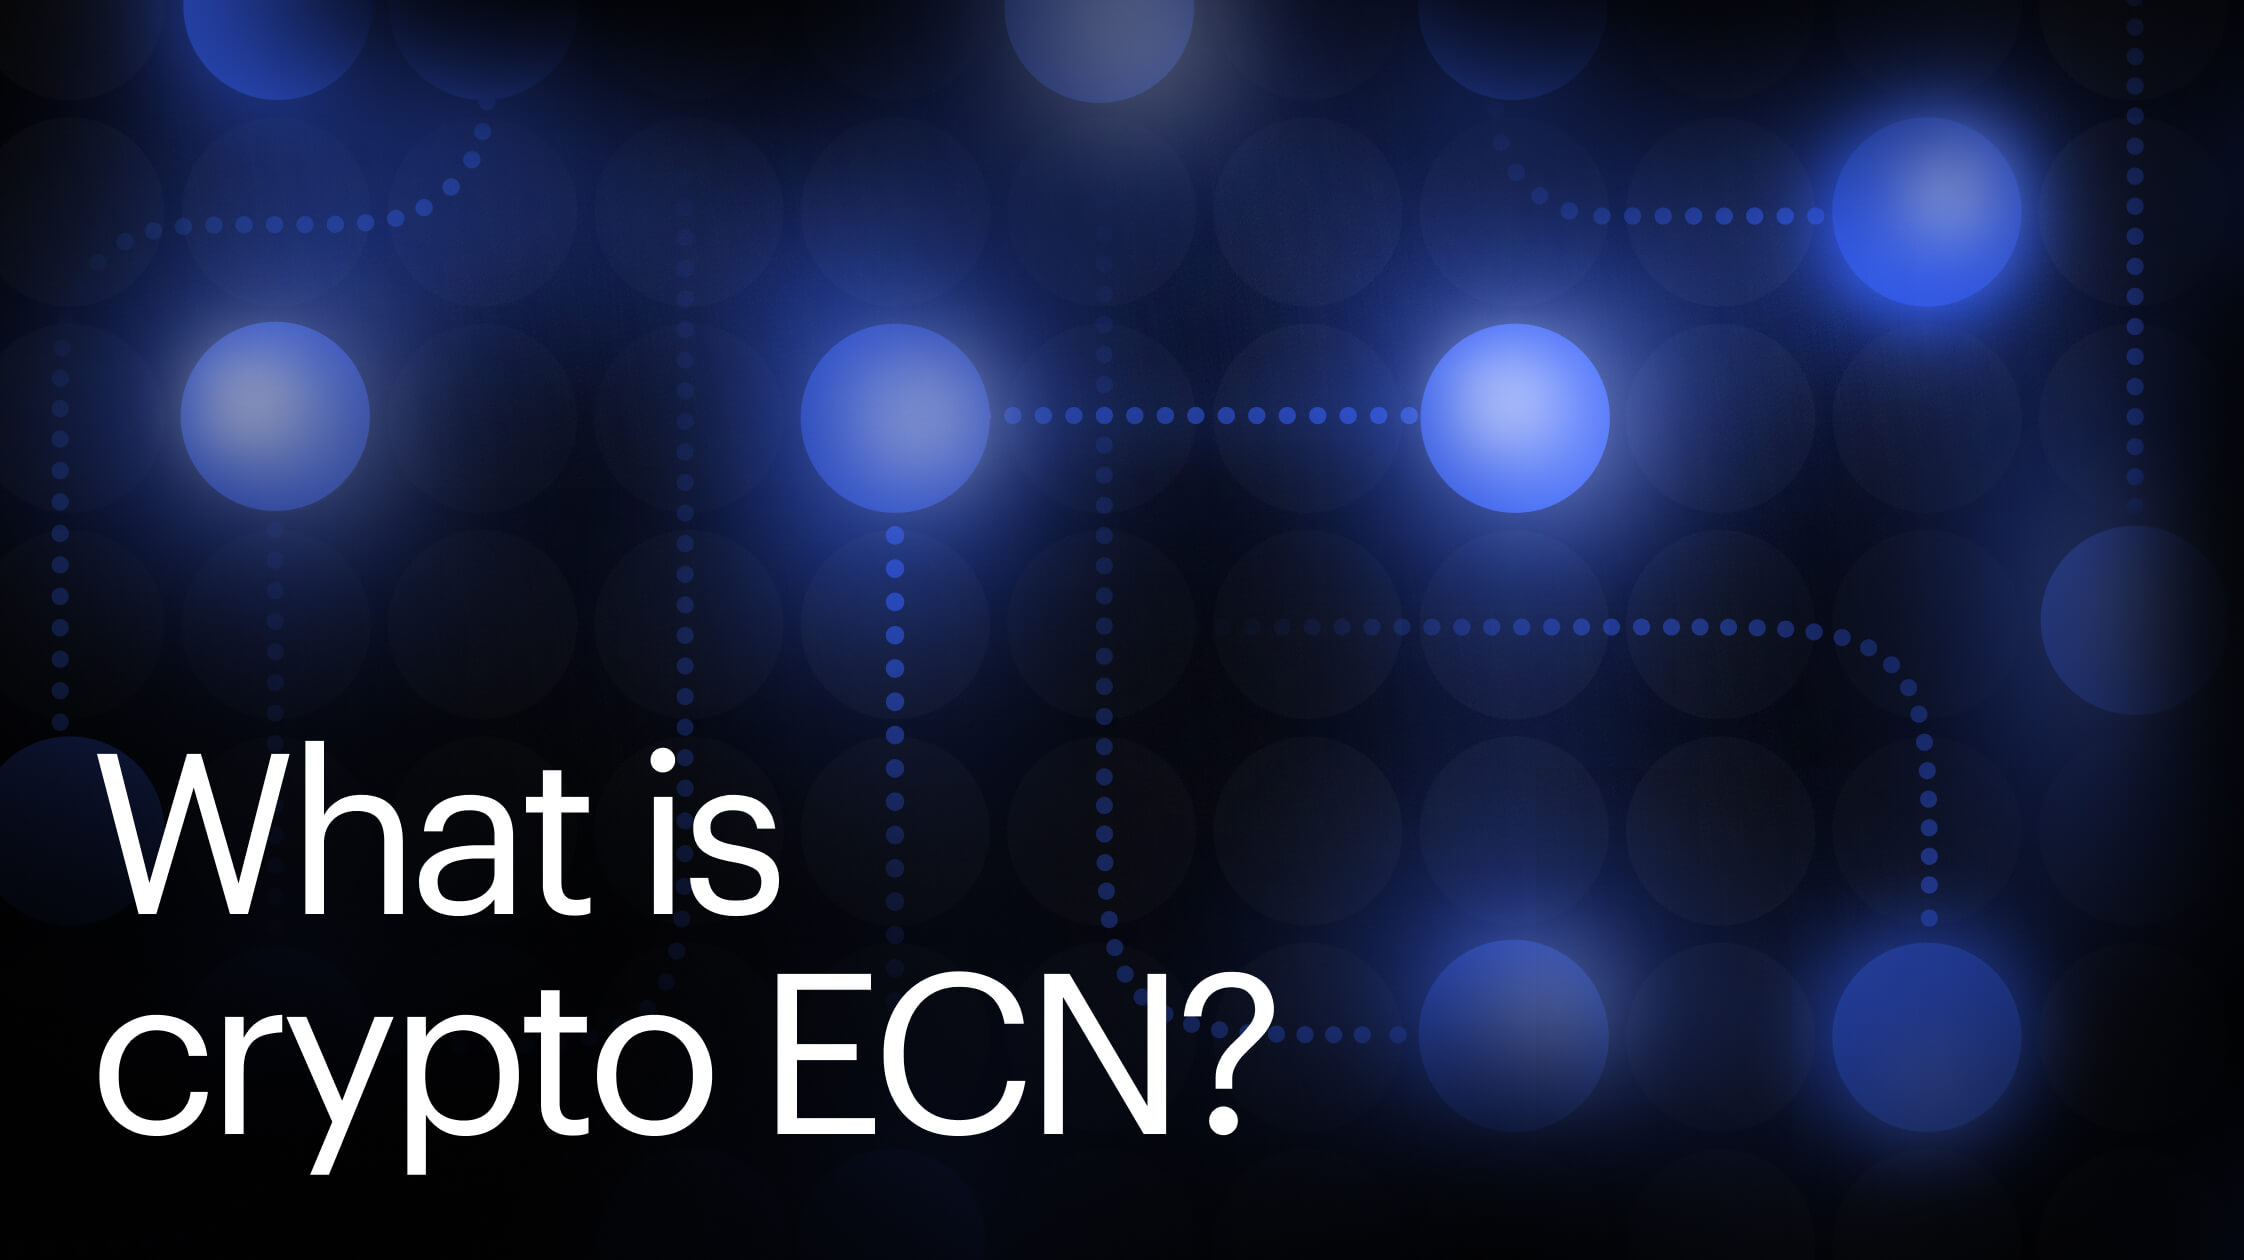 What is a Crypto ECN?